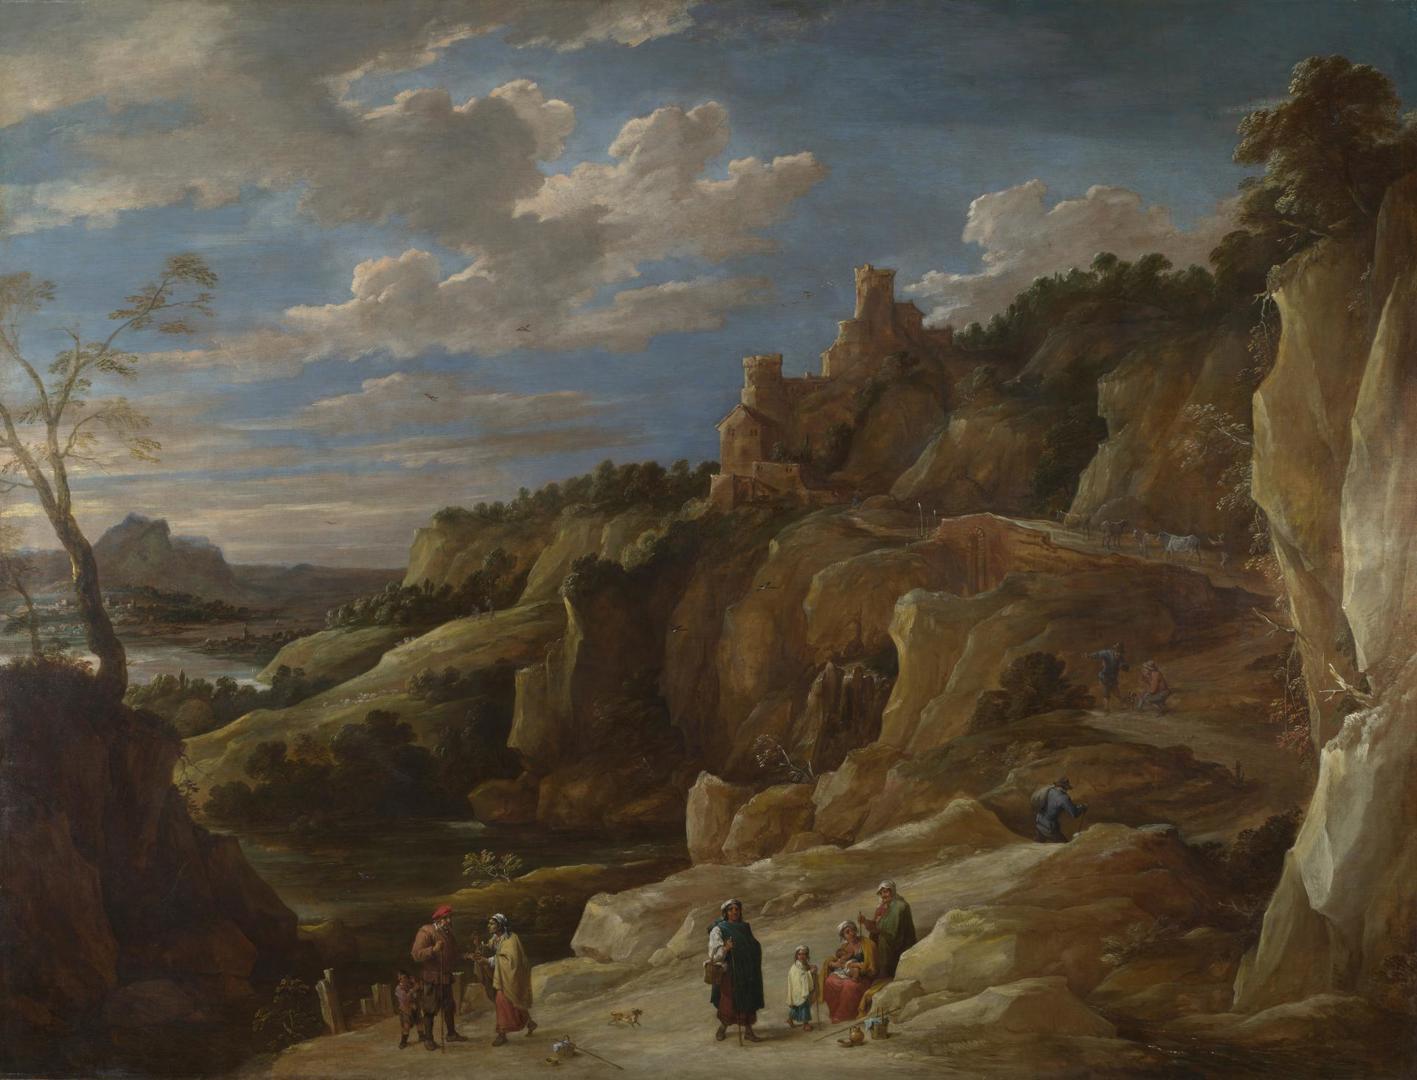 A Gipsy Fortune Teller in a Hilly Landscape by Probably by David Teniers the Younger